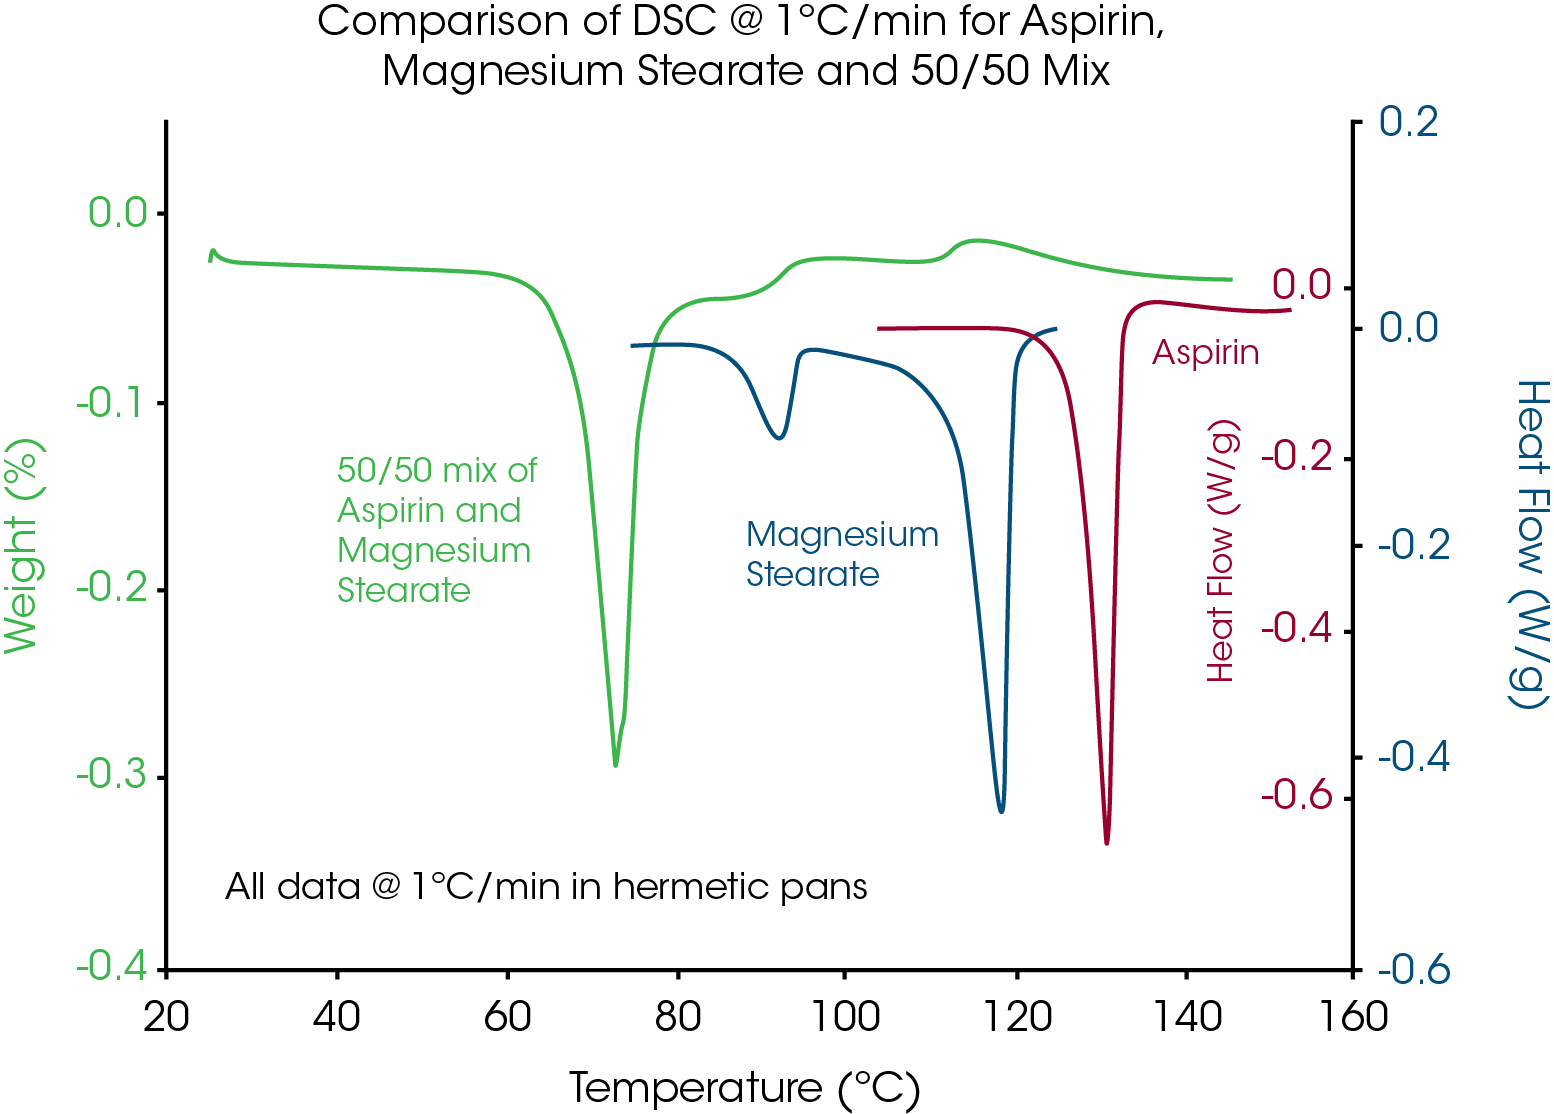 Figure 9: An overlay comparison of DSC data for aspirin, magnesium stearate and 50/50 mix (wt.) at 1°C/min shows that interaction occurs in the mixture because an apparent melting peak is created at a temperature below the melting points of the individual components.